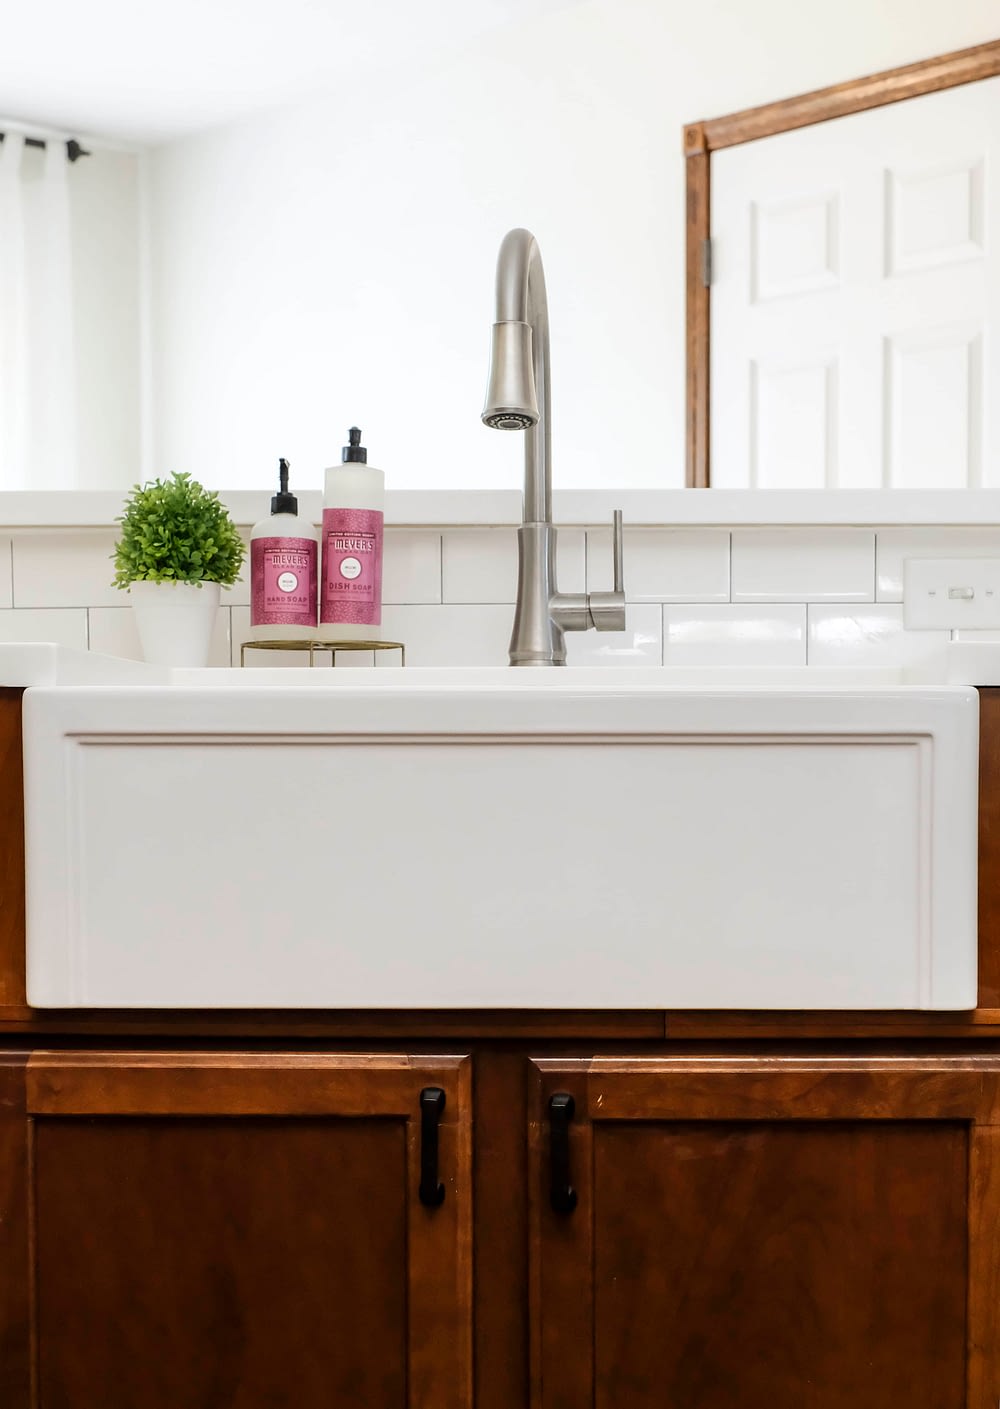 A white apron front fireclay farmhouse sink with a brushed nickel pull down faucet